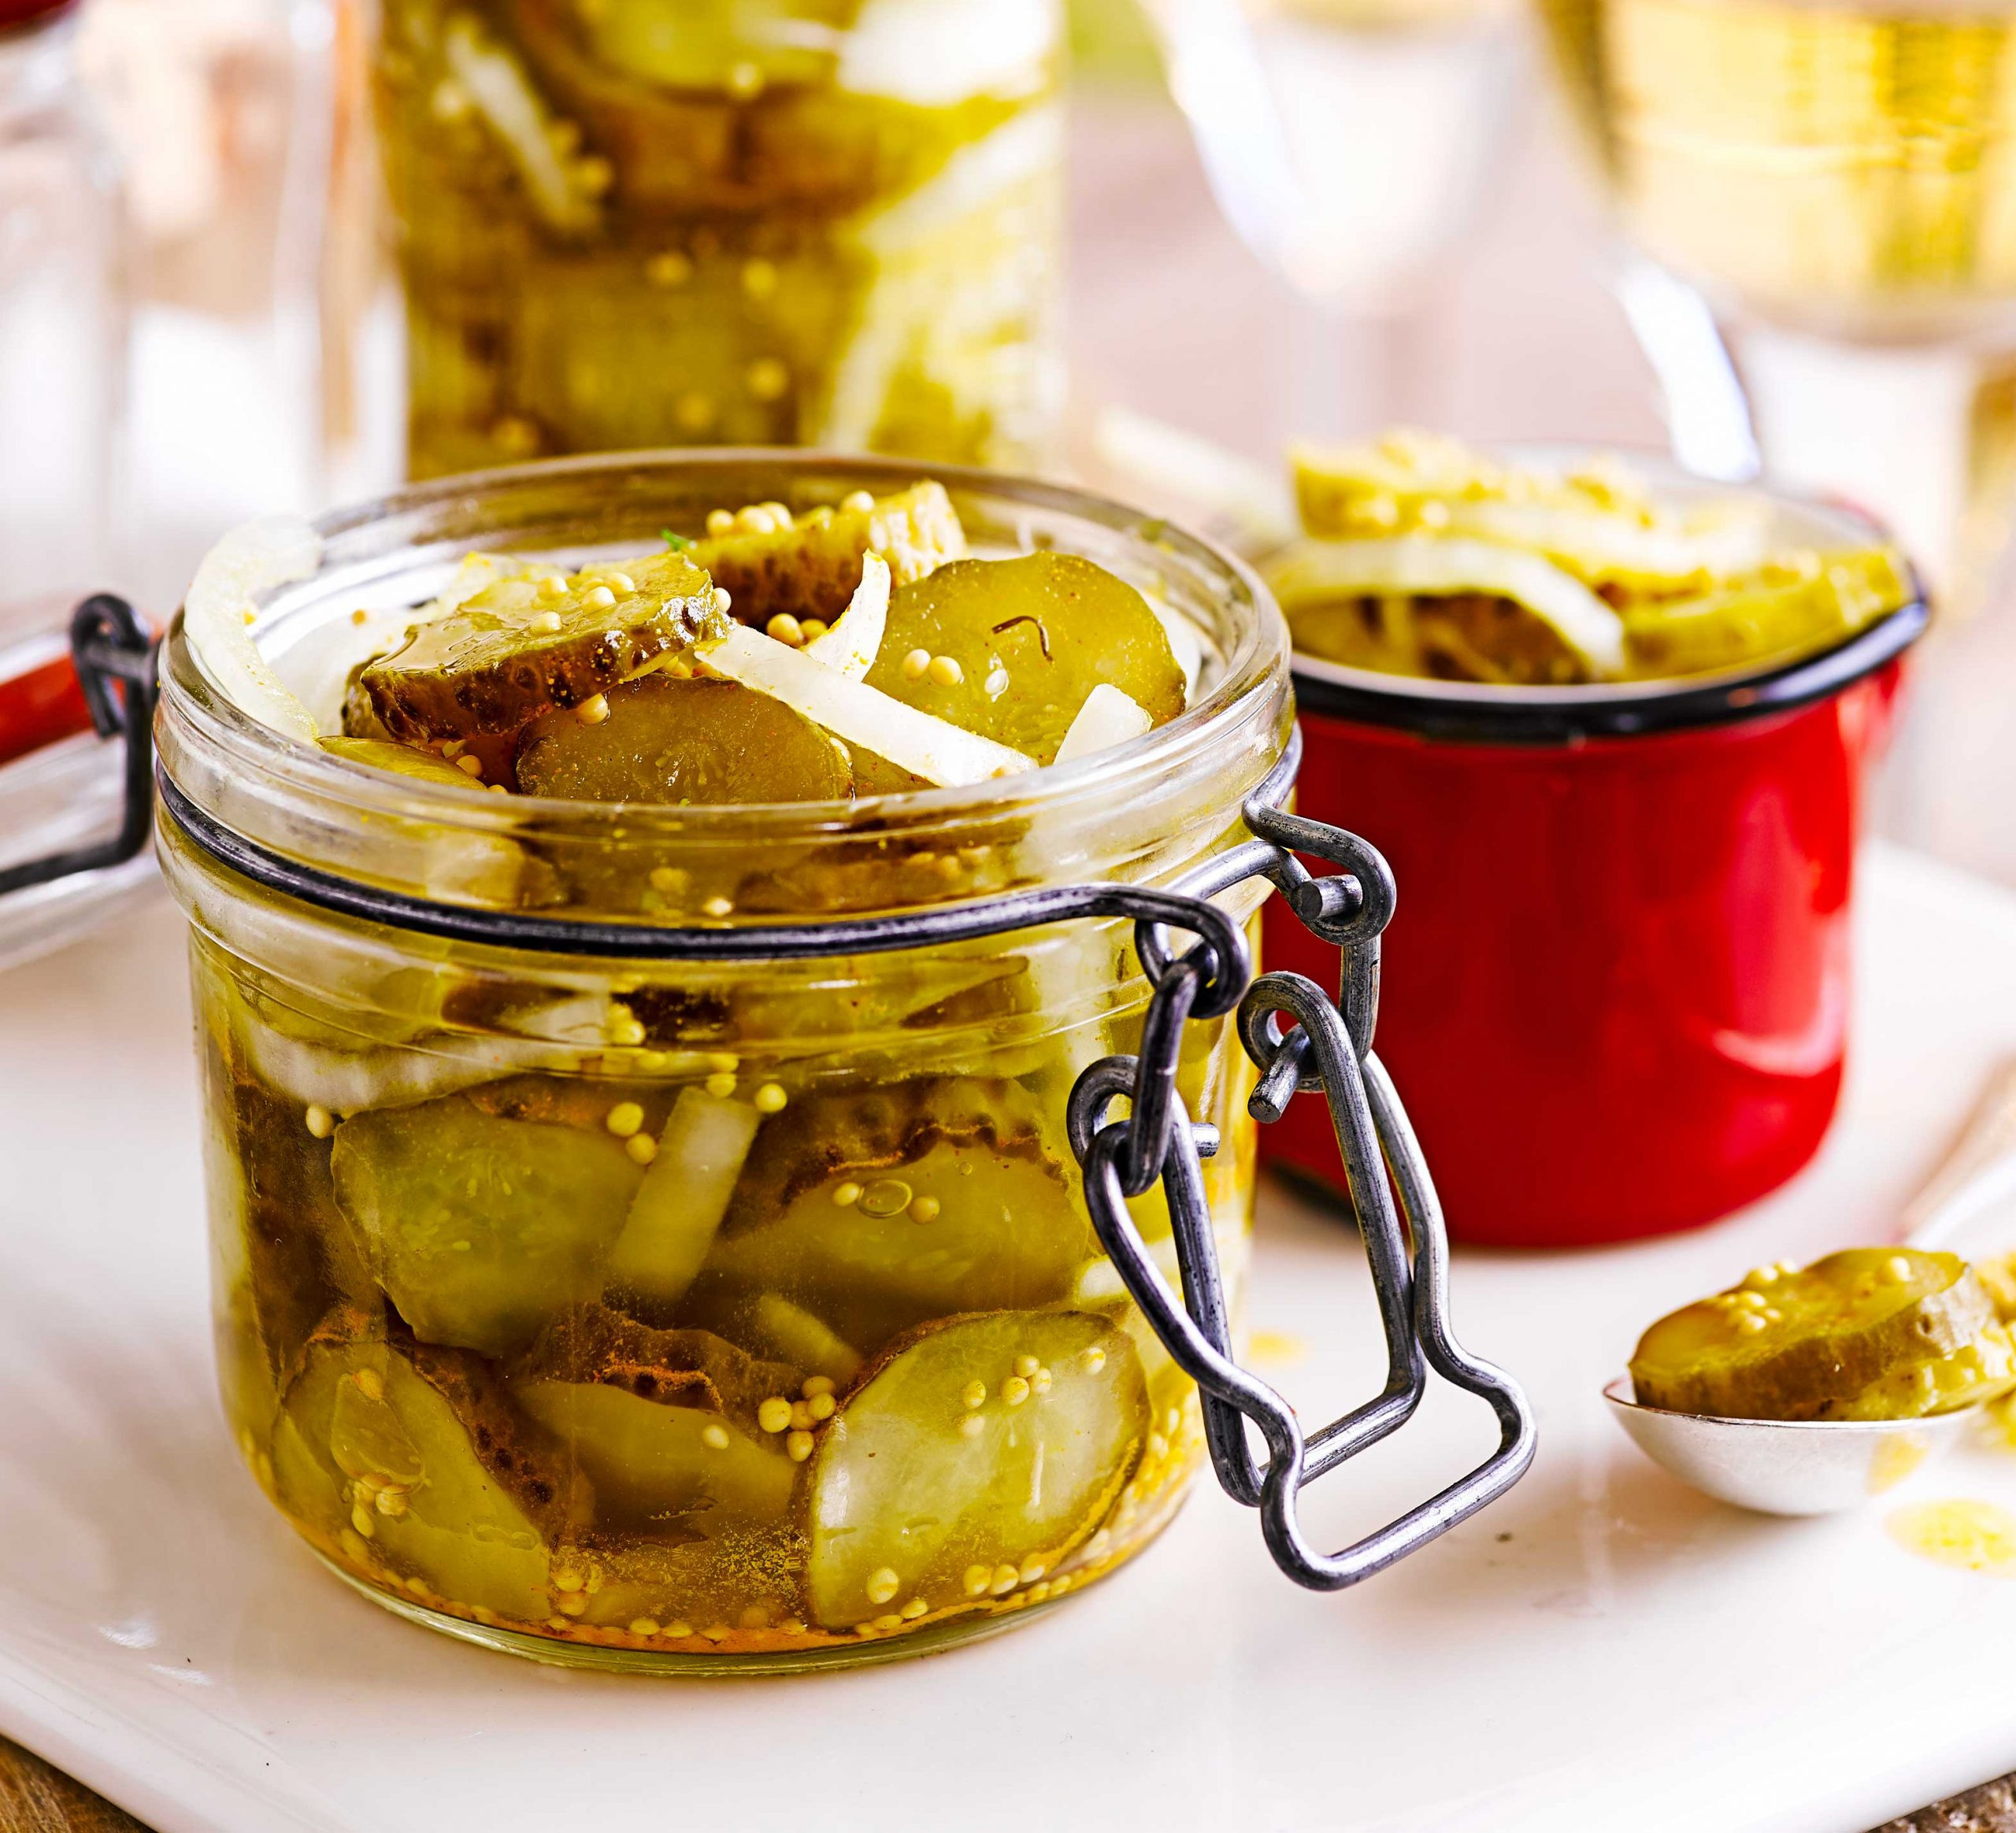 Recipe for Bread and butter Pickles Lovely Bread and butter Pickles – Sbcanning – Homemade